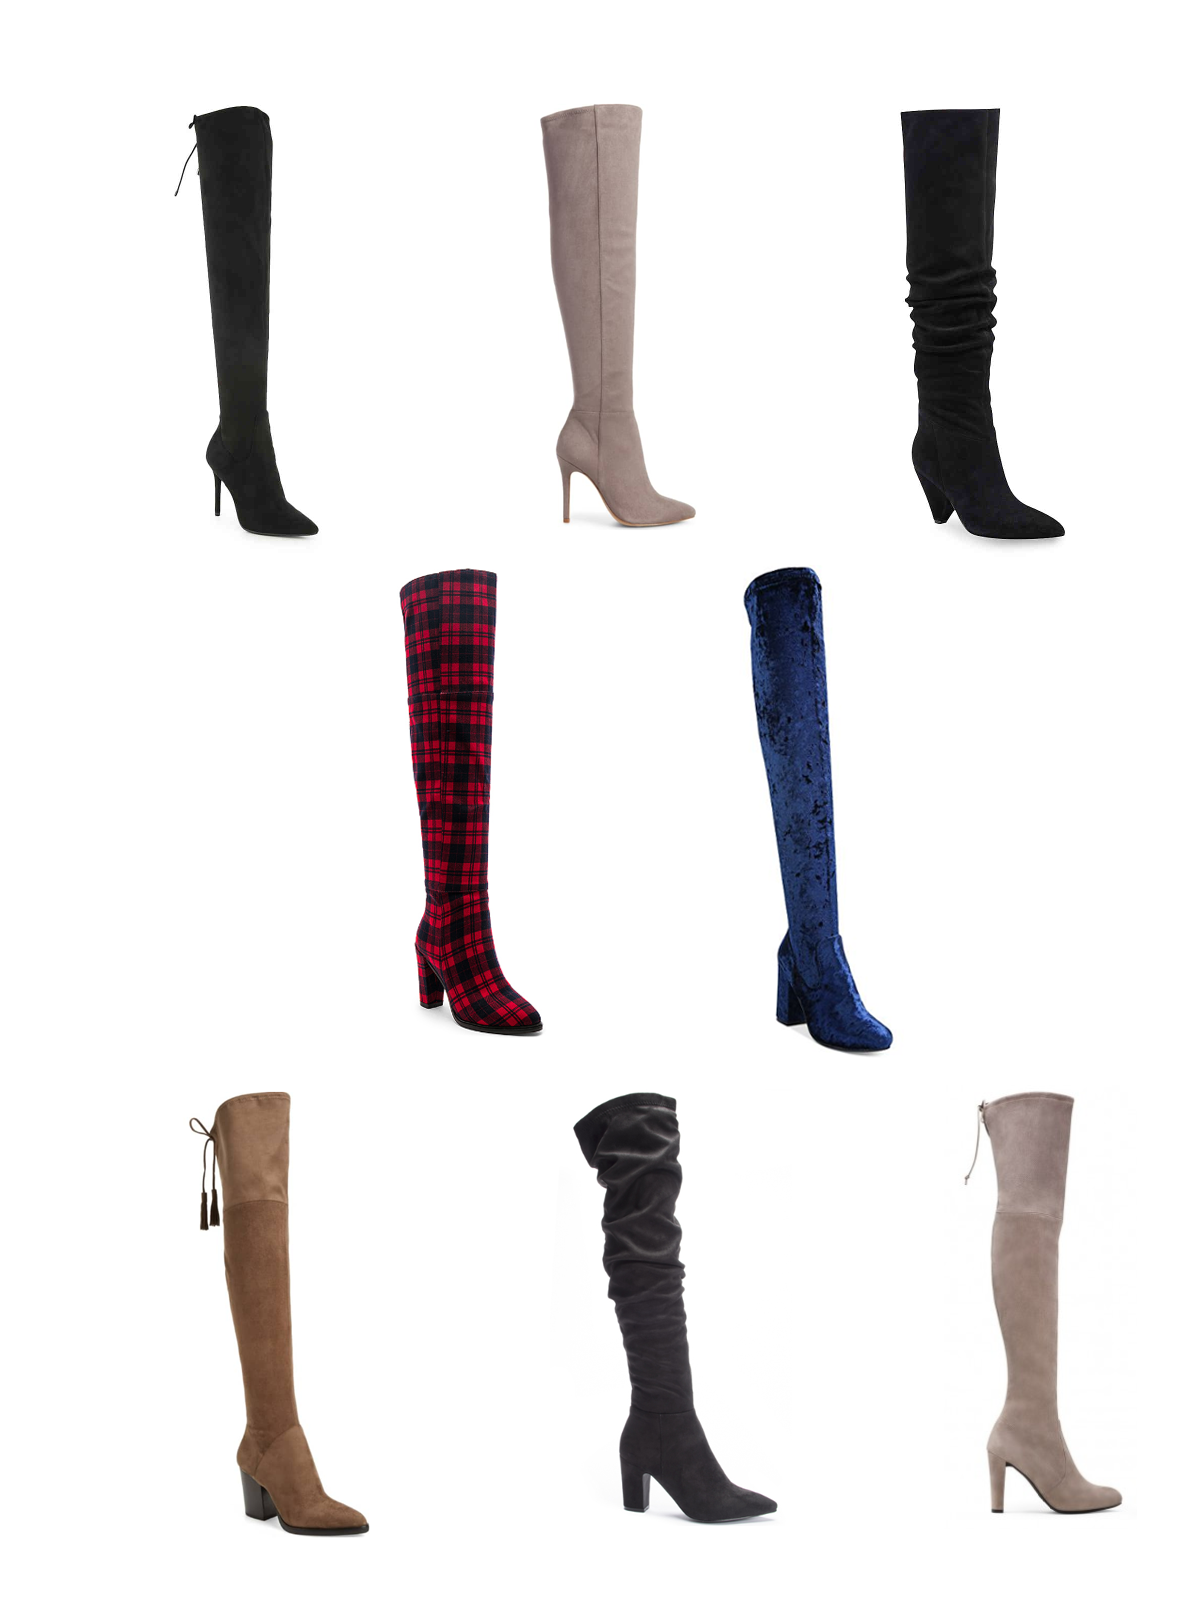 OTK Boots for Every Budget | rosey kate